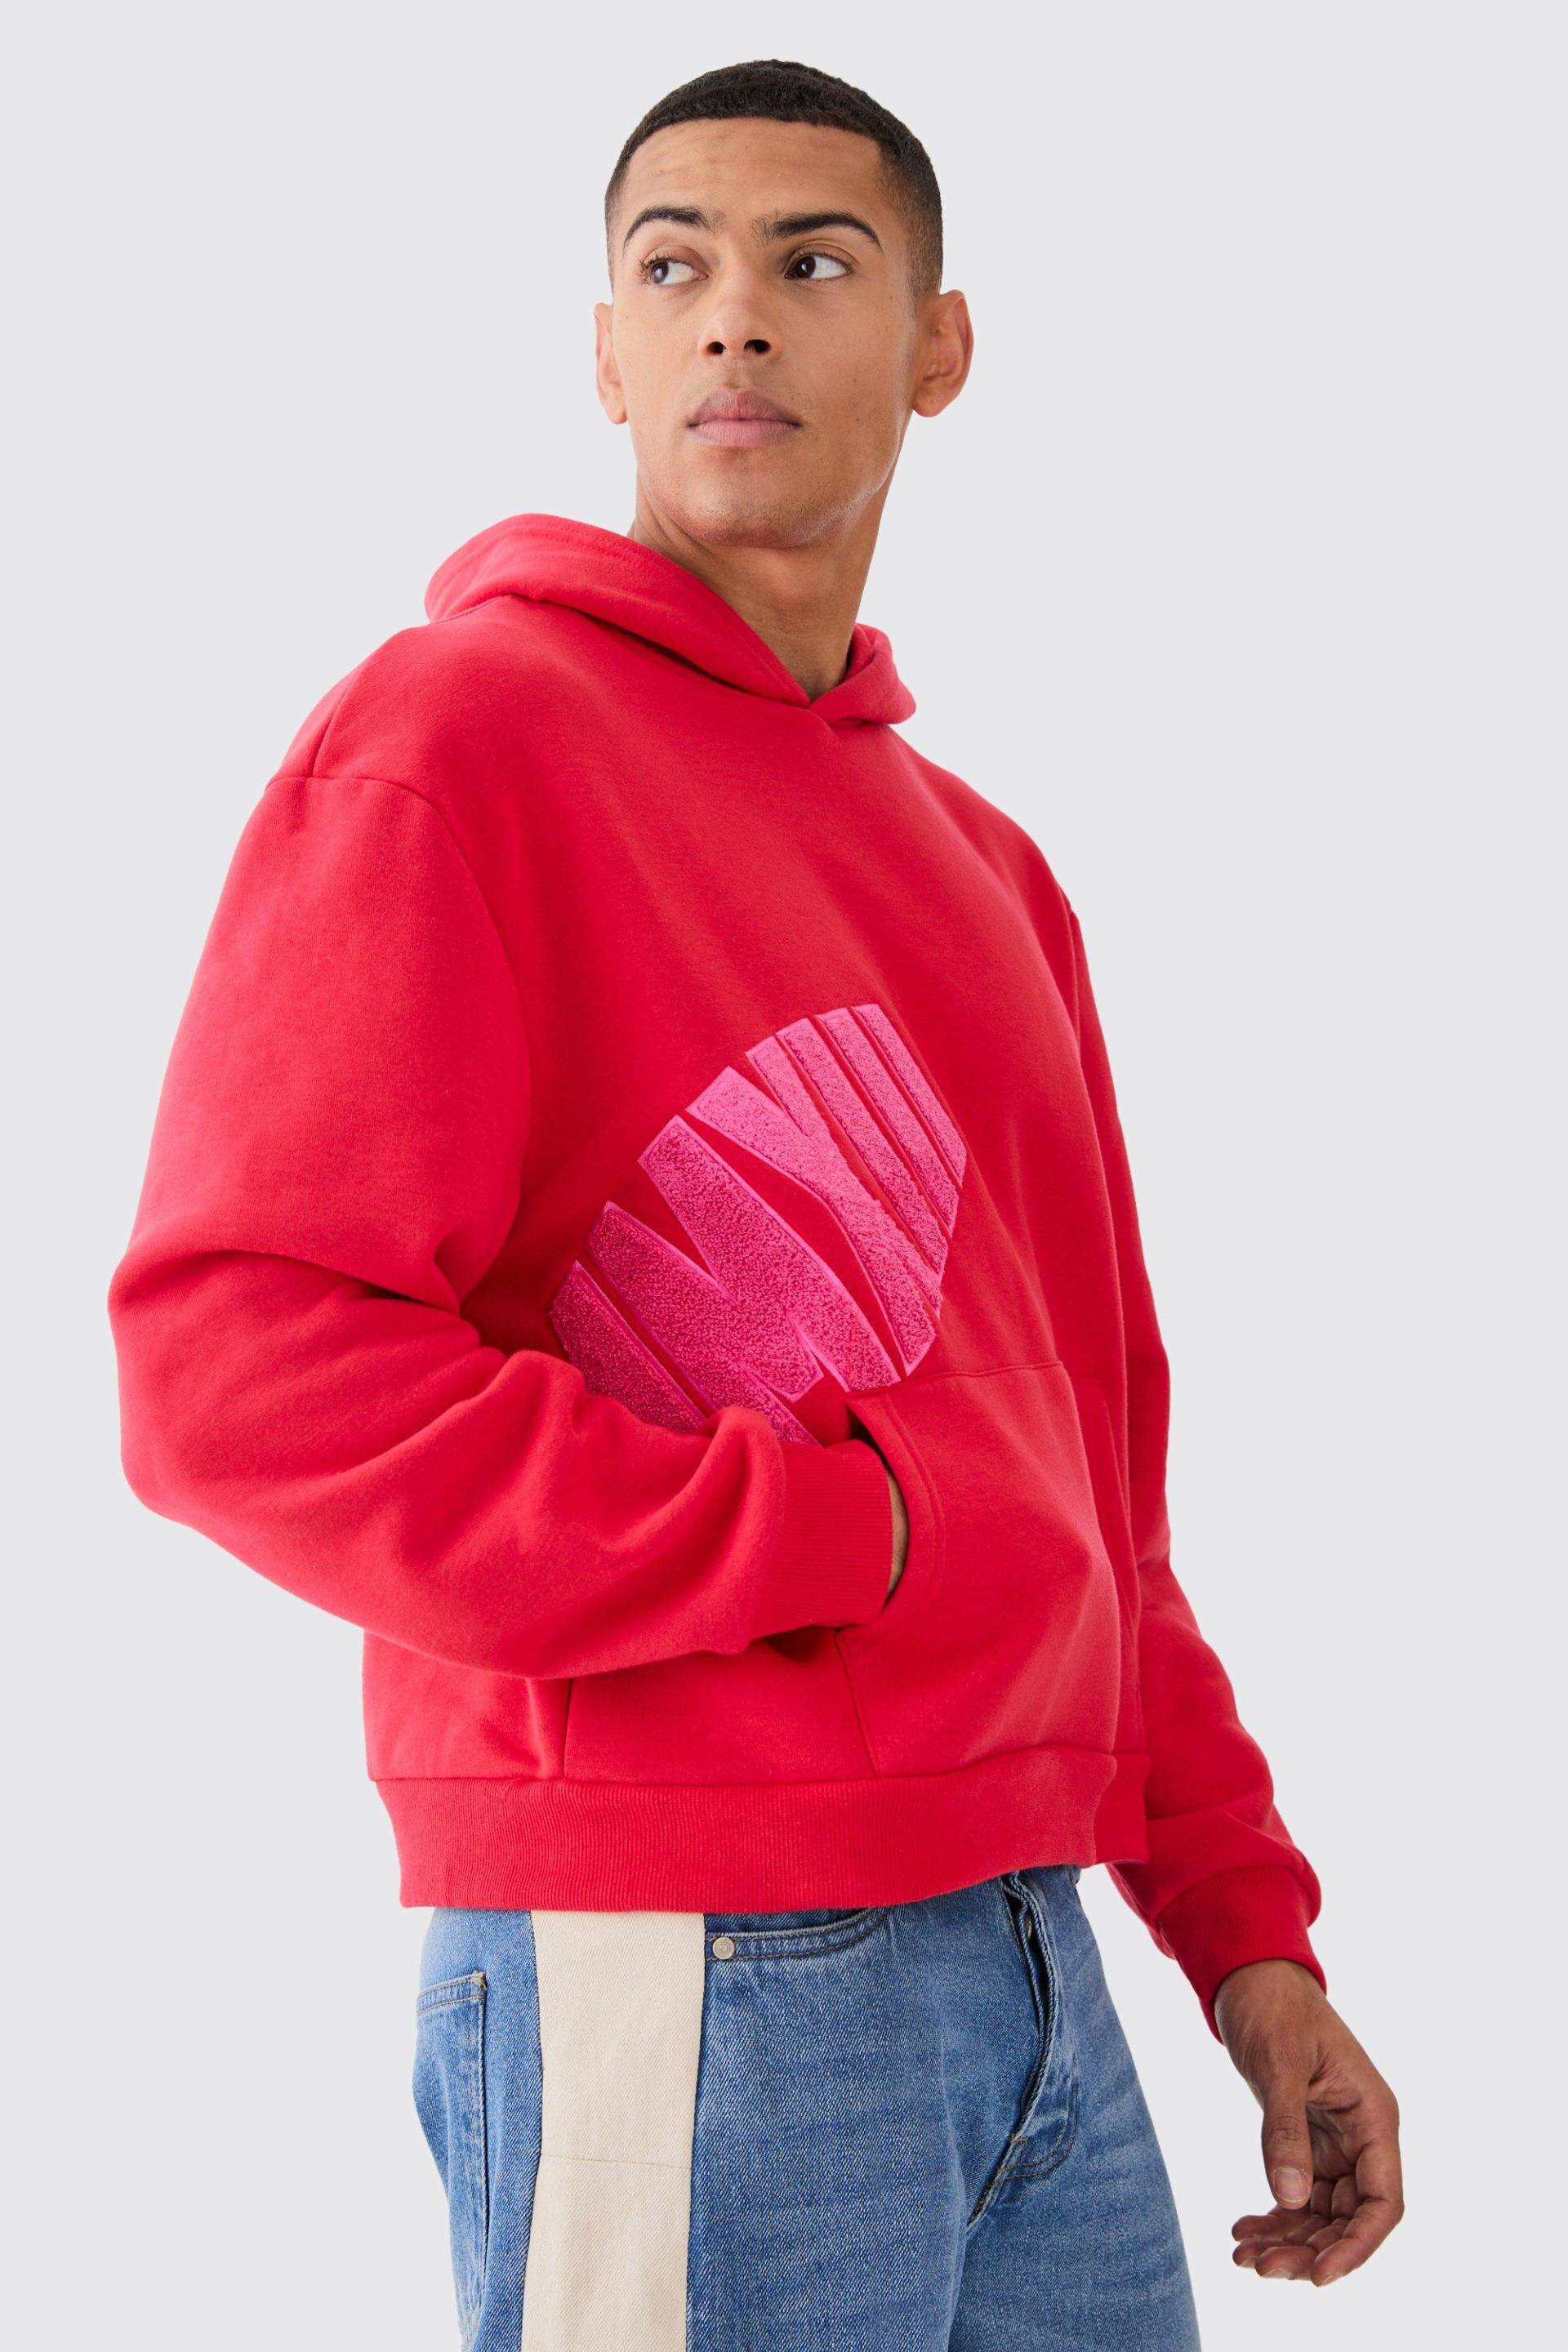 Mens Oversized Boxy Borg Applique Hoodie - Rot - S, Rot von boohooman